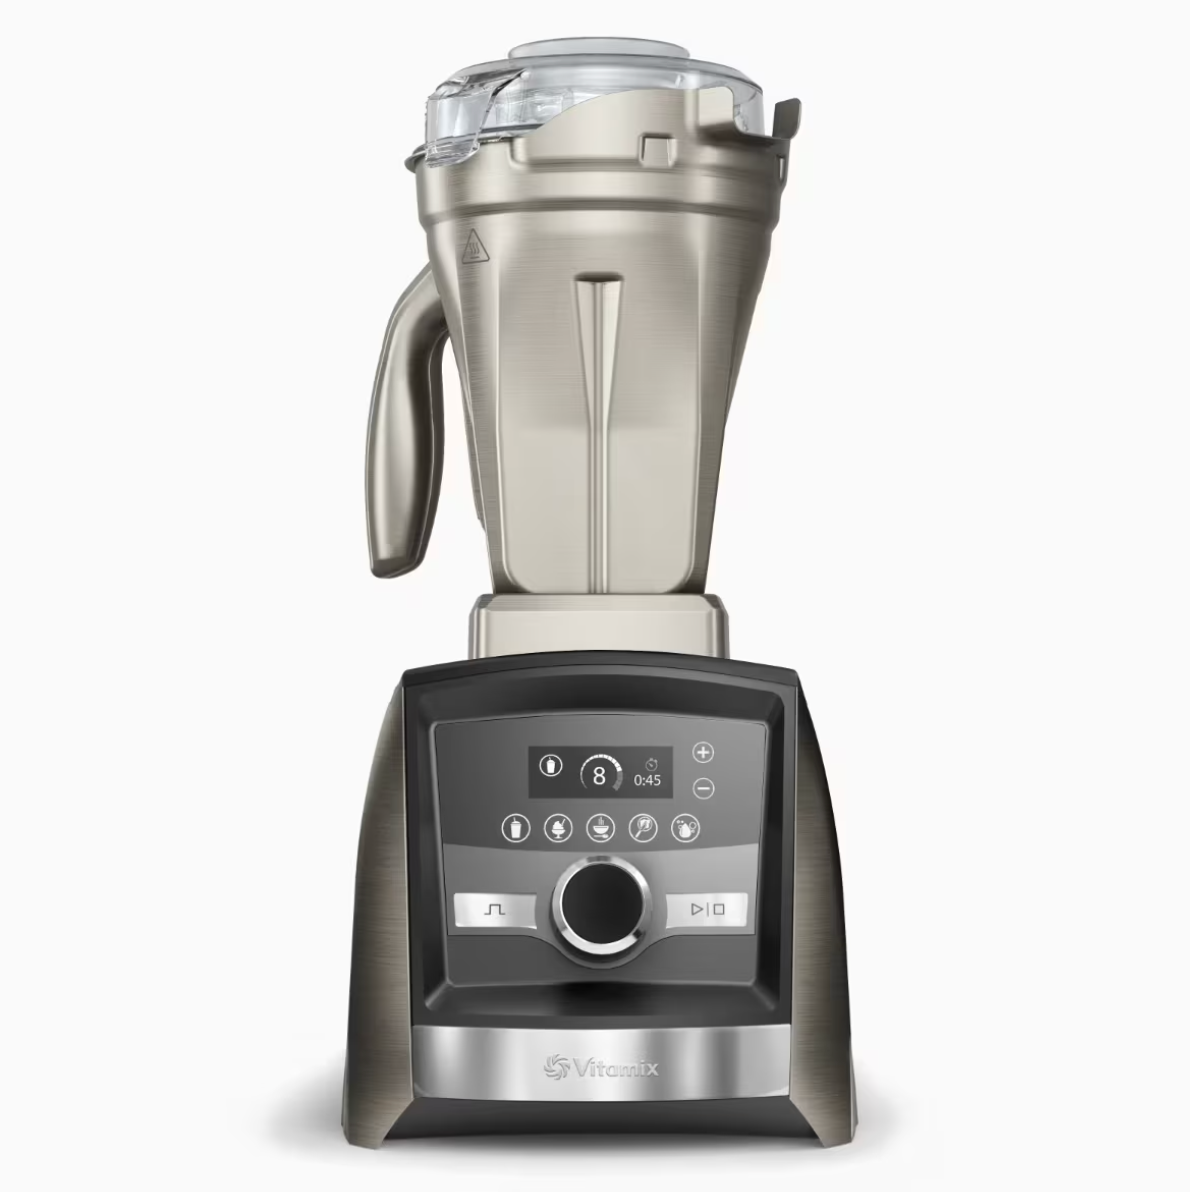 Vitamix Expands S-Series Line With Two New Powerful, Premium Personal  Blenders